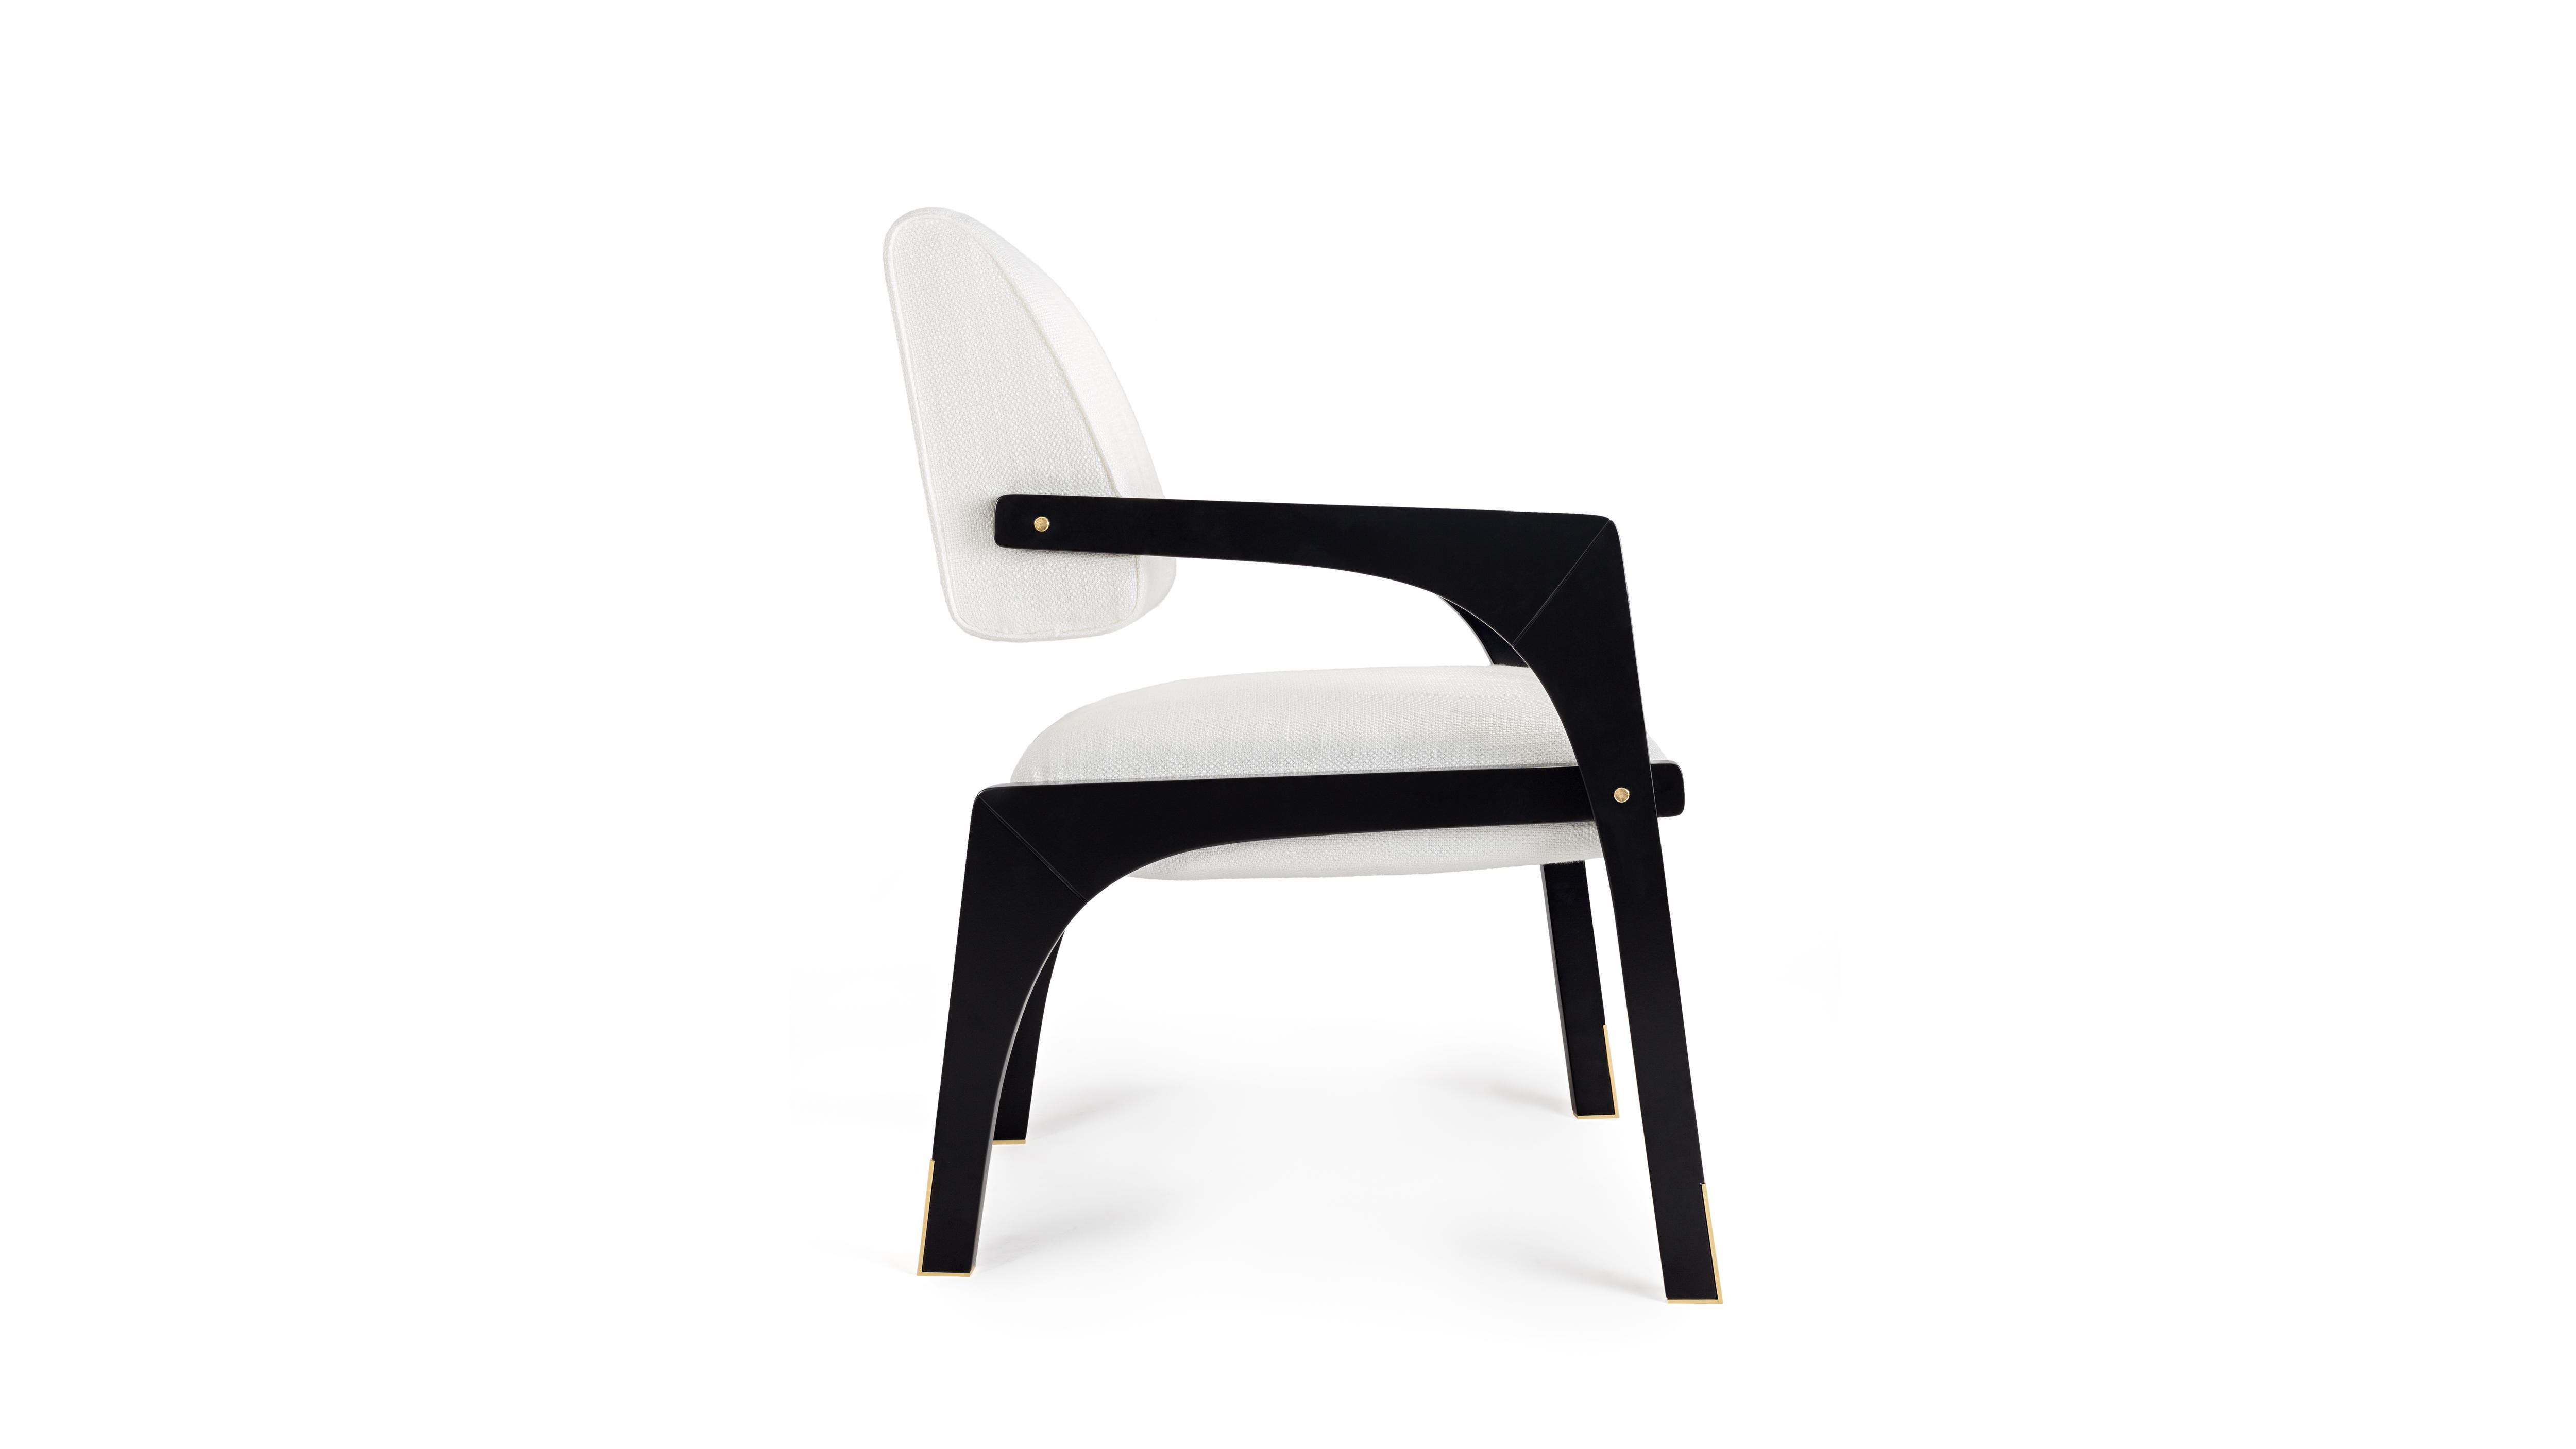 Best Chair Design at the International Design & Architecture Awards 2021
Honorable Mention at the European Product Design Awards 2021

The Arches dining chair is designed in the likeness of the architectural scale that suggests a crossing through